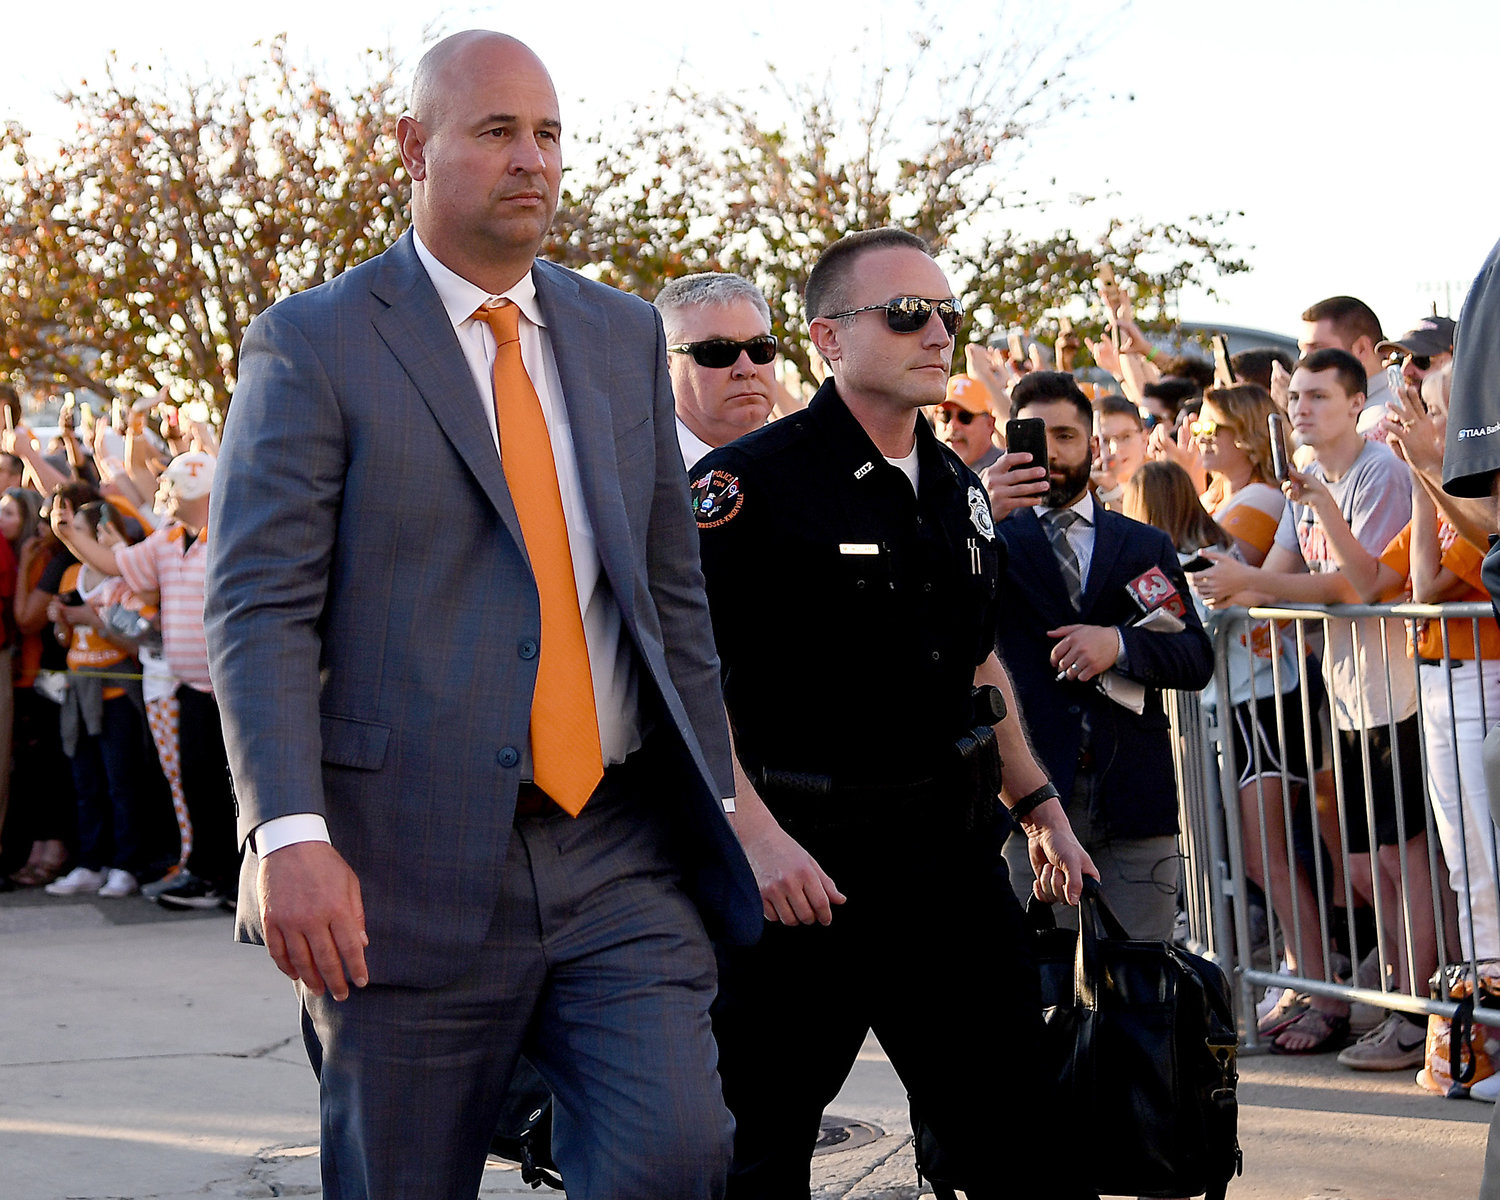 Tennessee Volunteers head coach Jeremy Pruitt arrives at TIAA Bank Field in Jacksonville, Fla., for the Gator Bowl NCAA football game against the Indiana Hoosiers Thursday, Jan. 2, 2020.